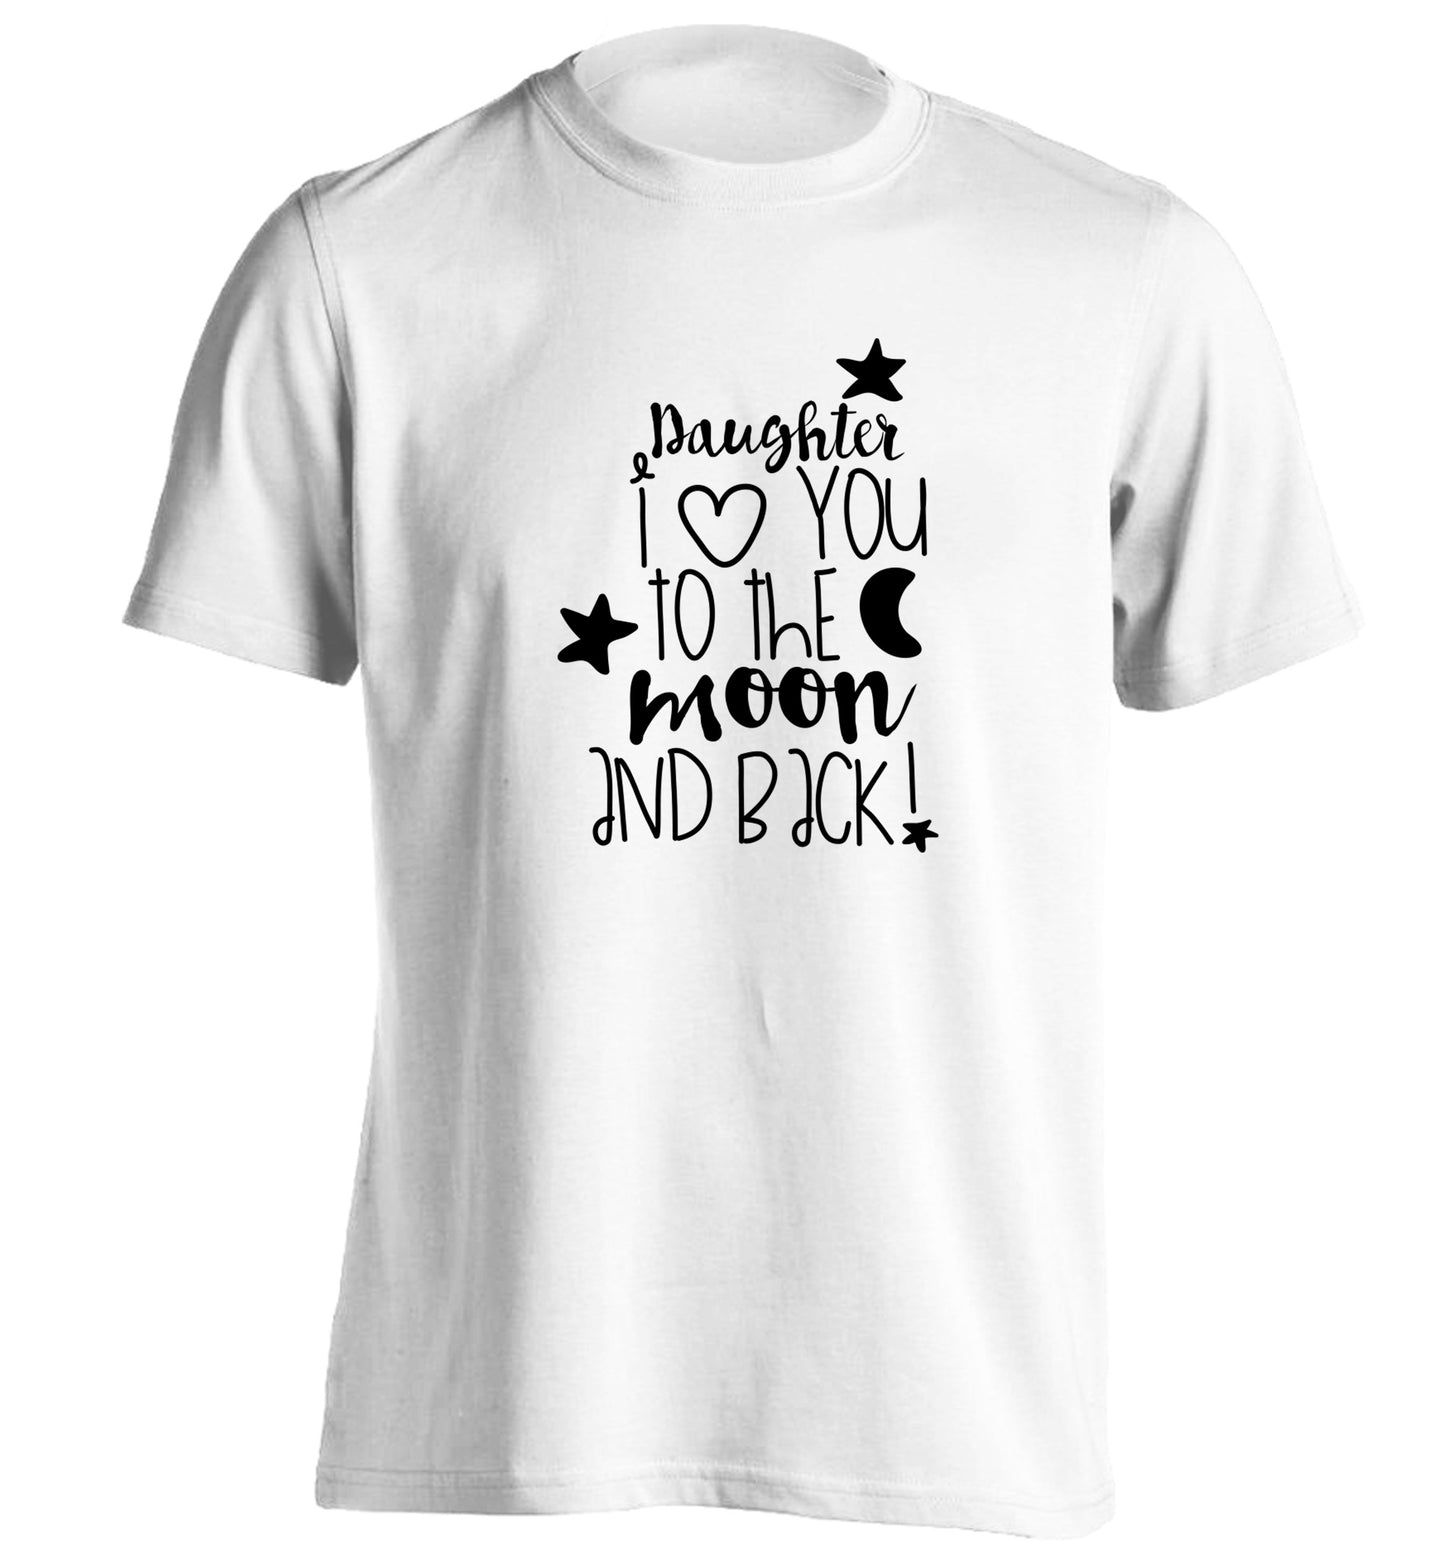 Daughter I love you to the moon and back adults unisex white Tshirt 2XL